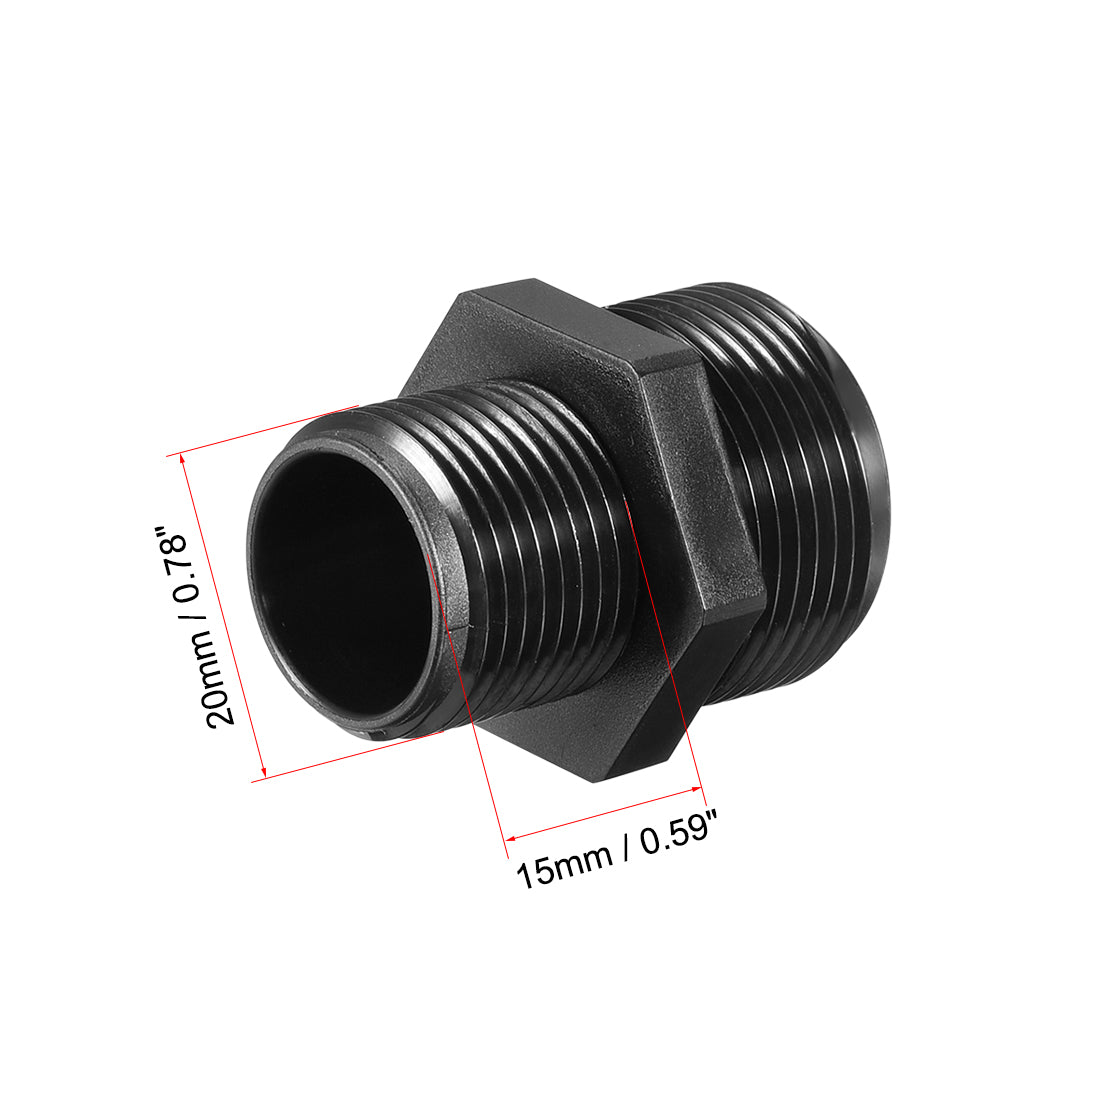 uxcell Uxcell M20 Cable Gland 2 Holes Waterproof IP68 Nylon Joint Adjustable Locknut for 4.3-6.1mm Dia Wire